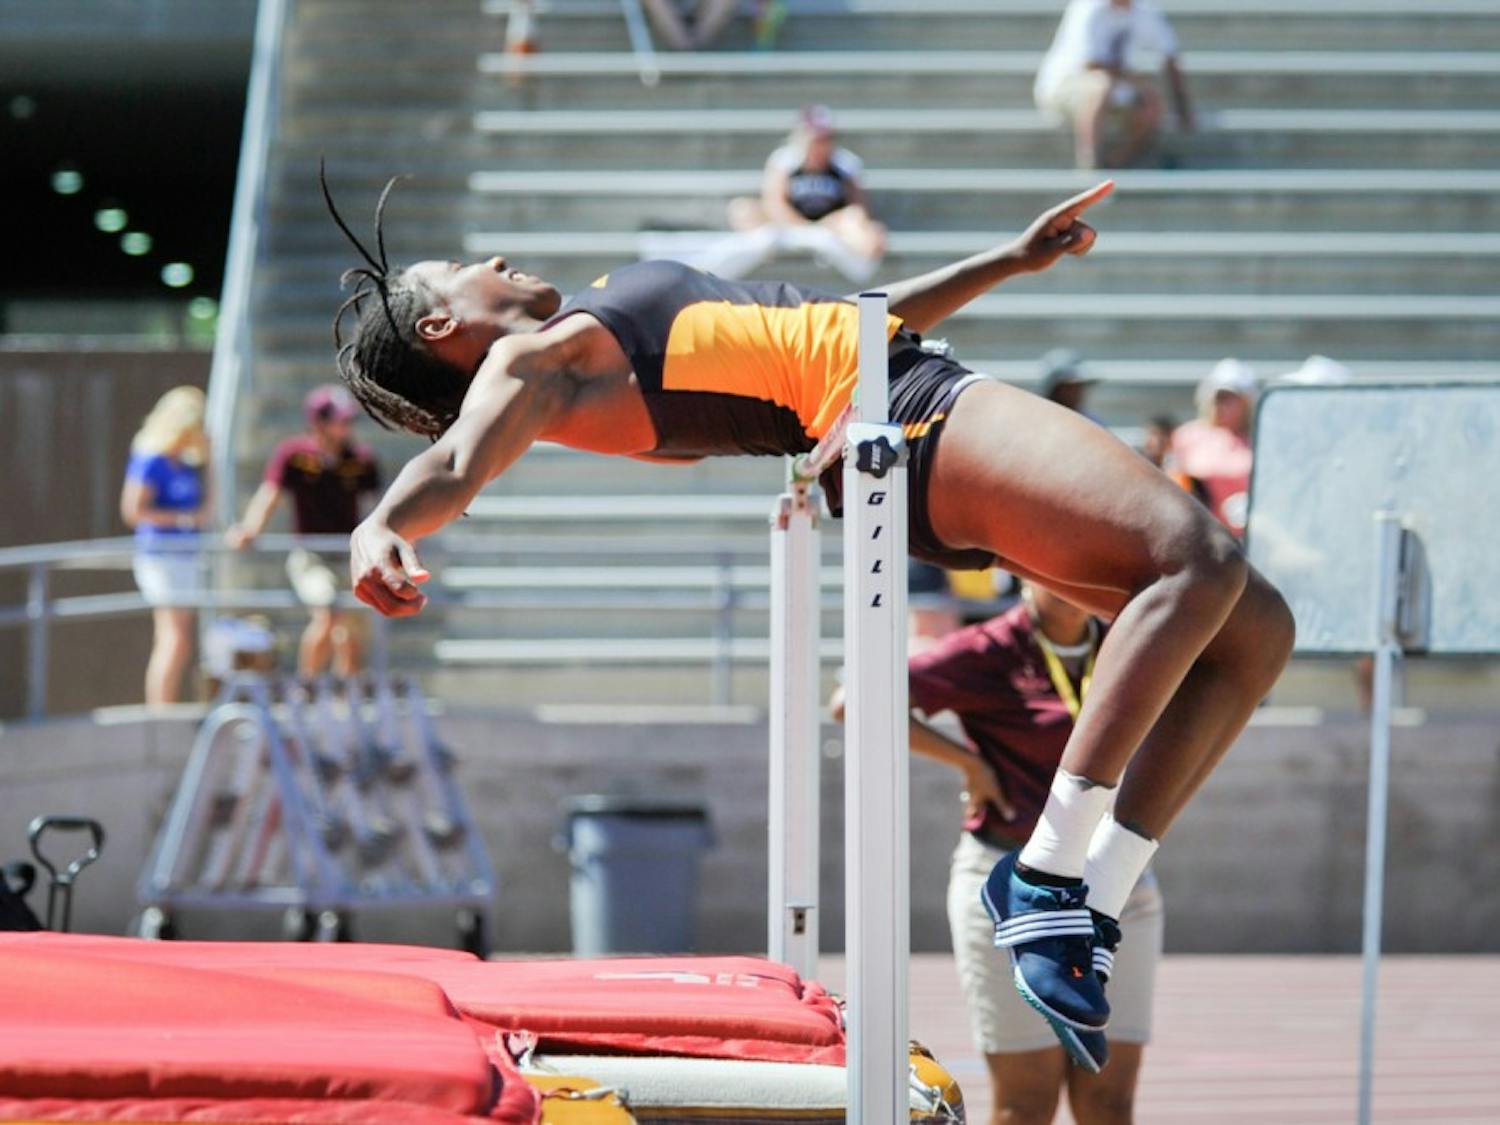 ASU track and field's first home weekend